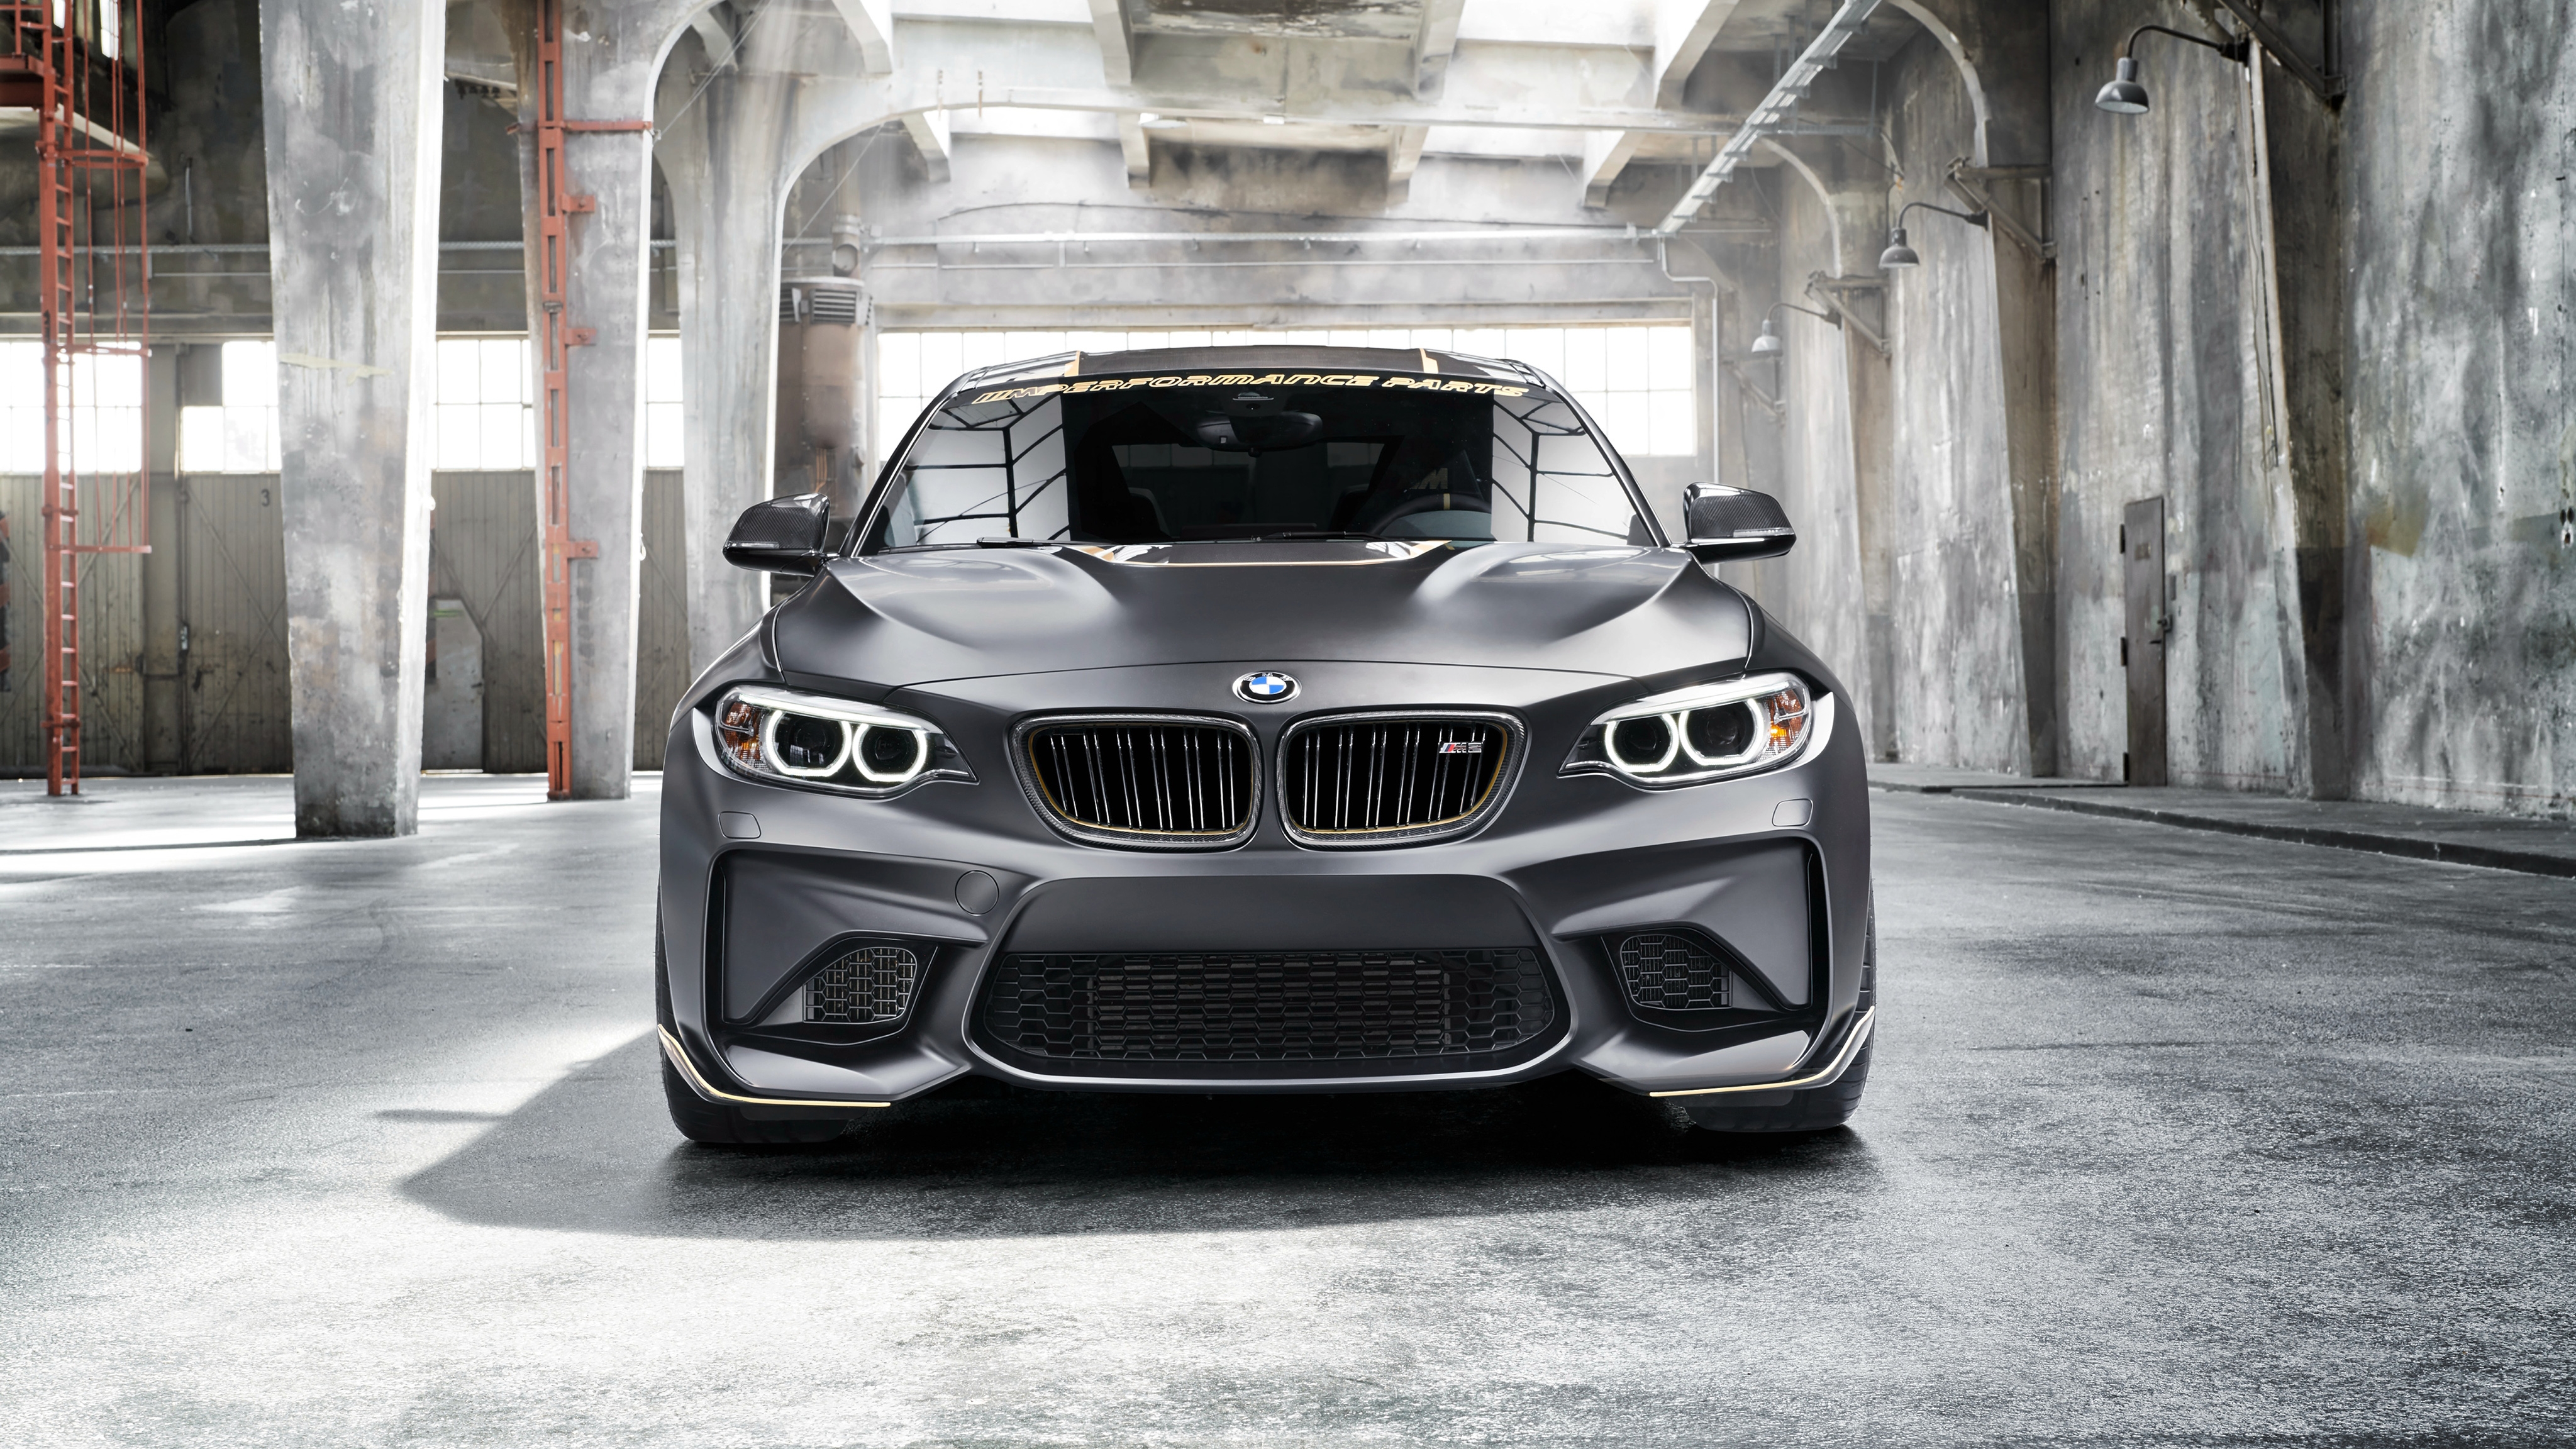 Wallpapers bmw m2 front view luxury cars on the desktop